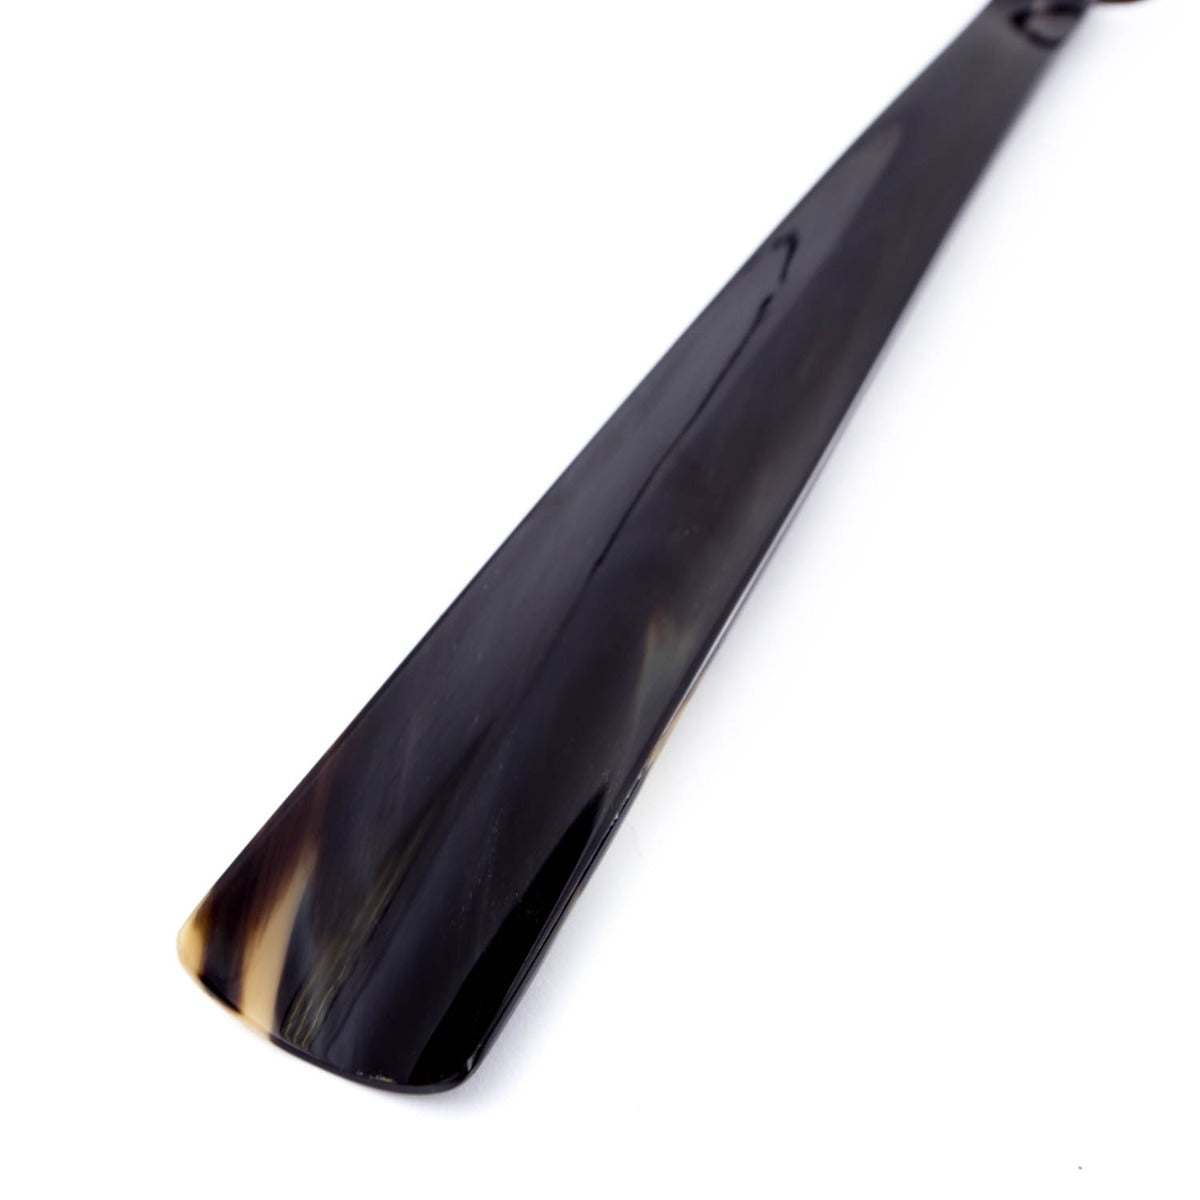 A pair of black and white Wellington 14 in Tip-End Shoehorn tweezers from KirbyAllison.com on a white surface.